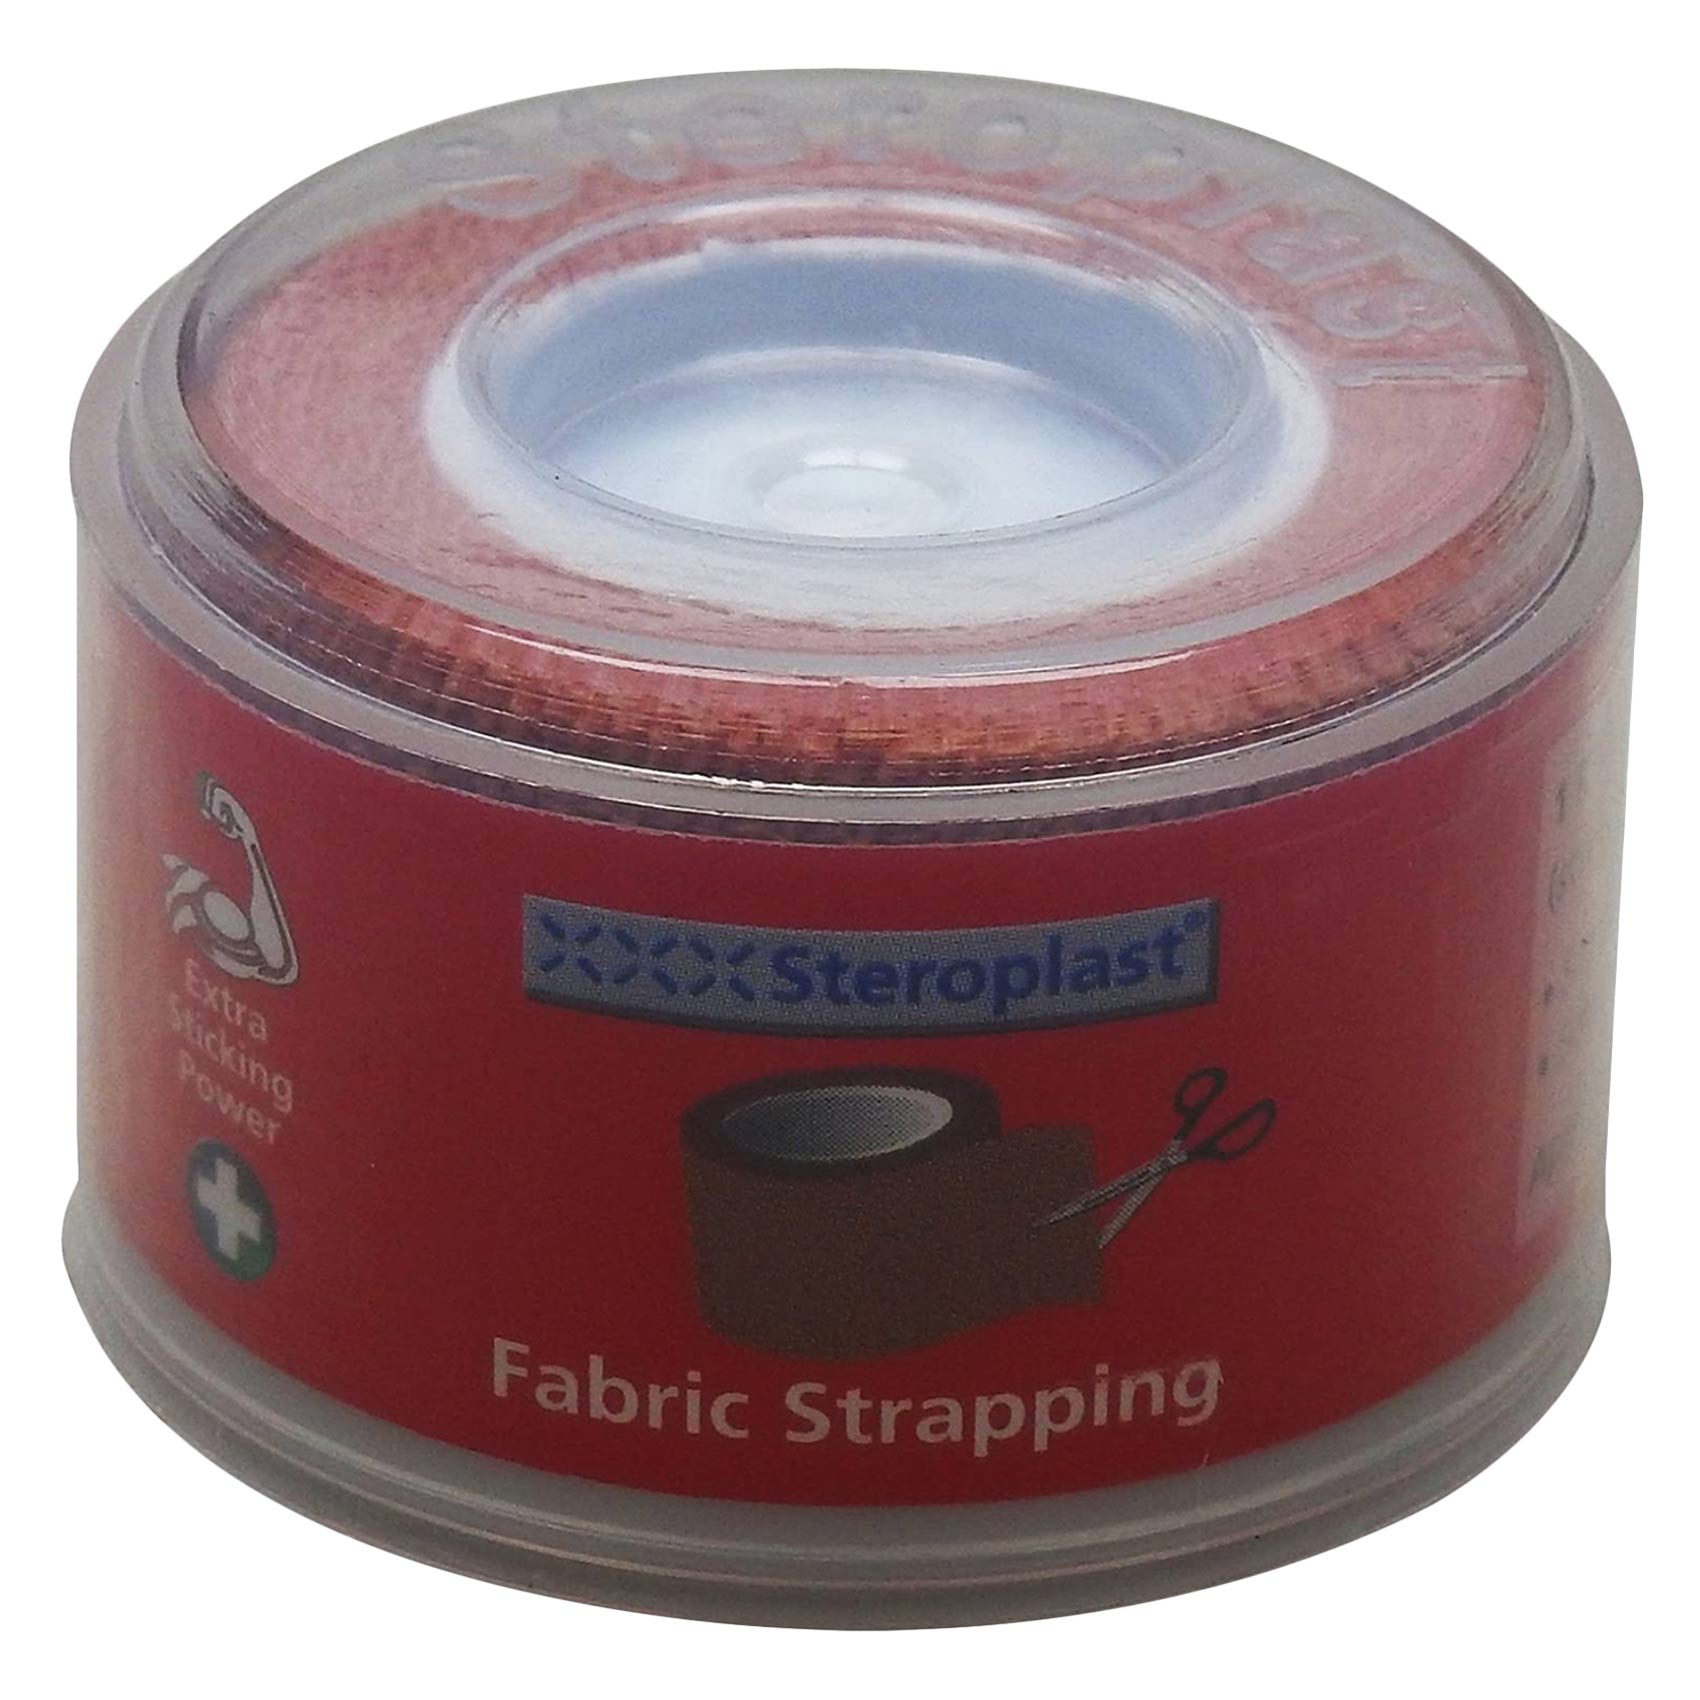 Steroplast Fabric Strapping Brown 2.5cm x 1.5m